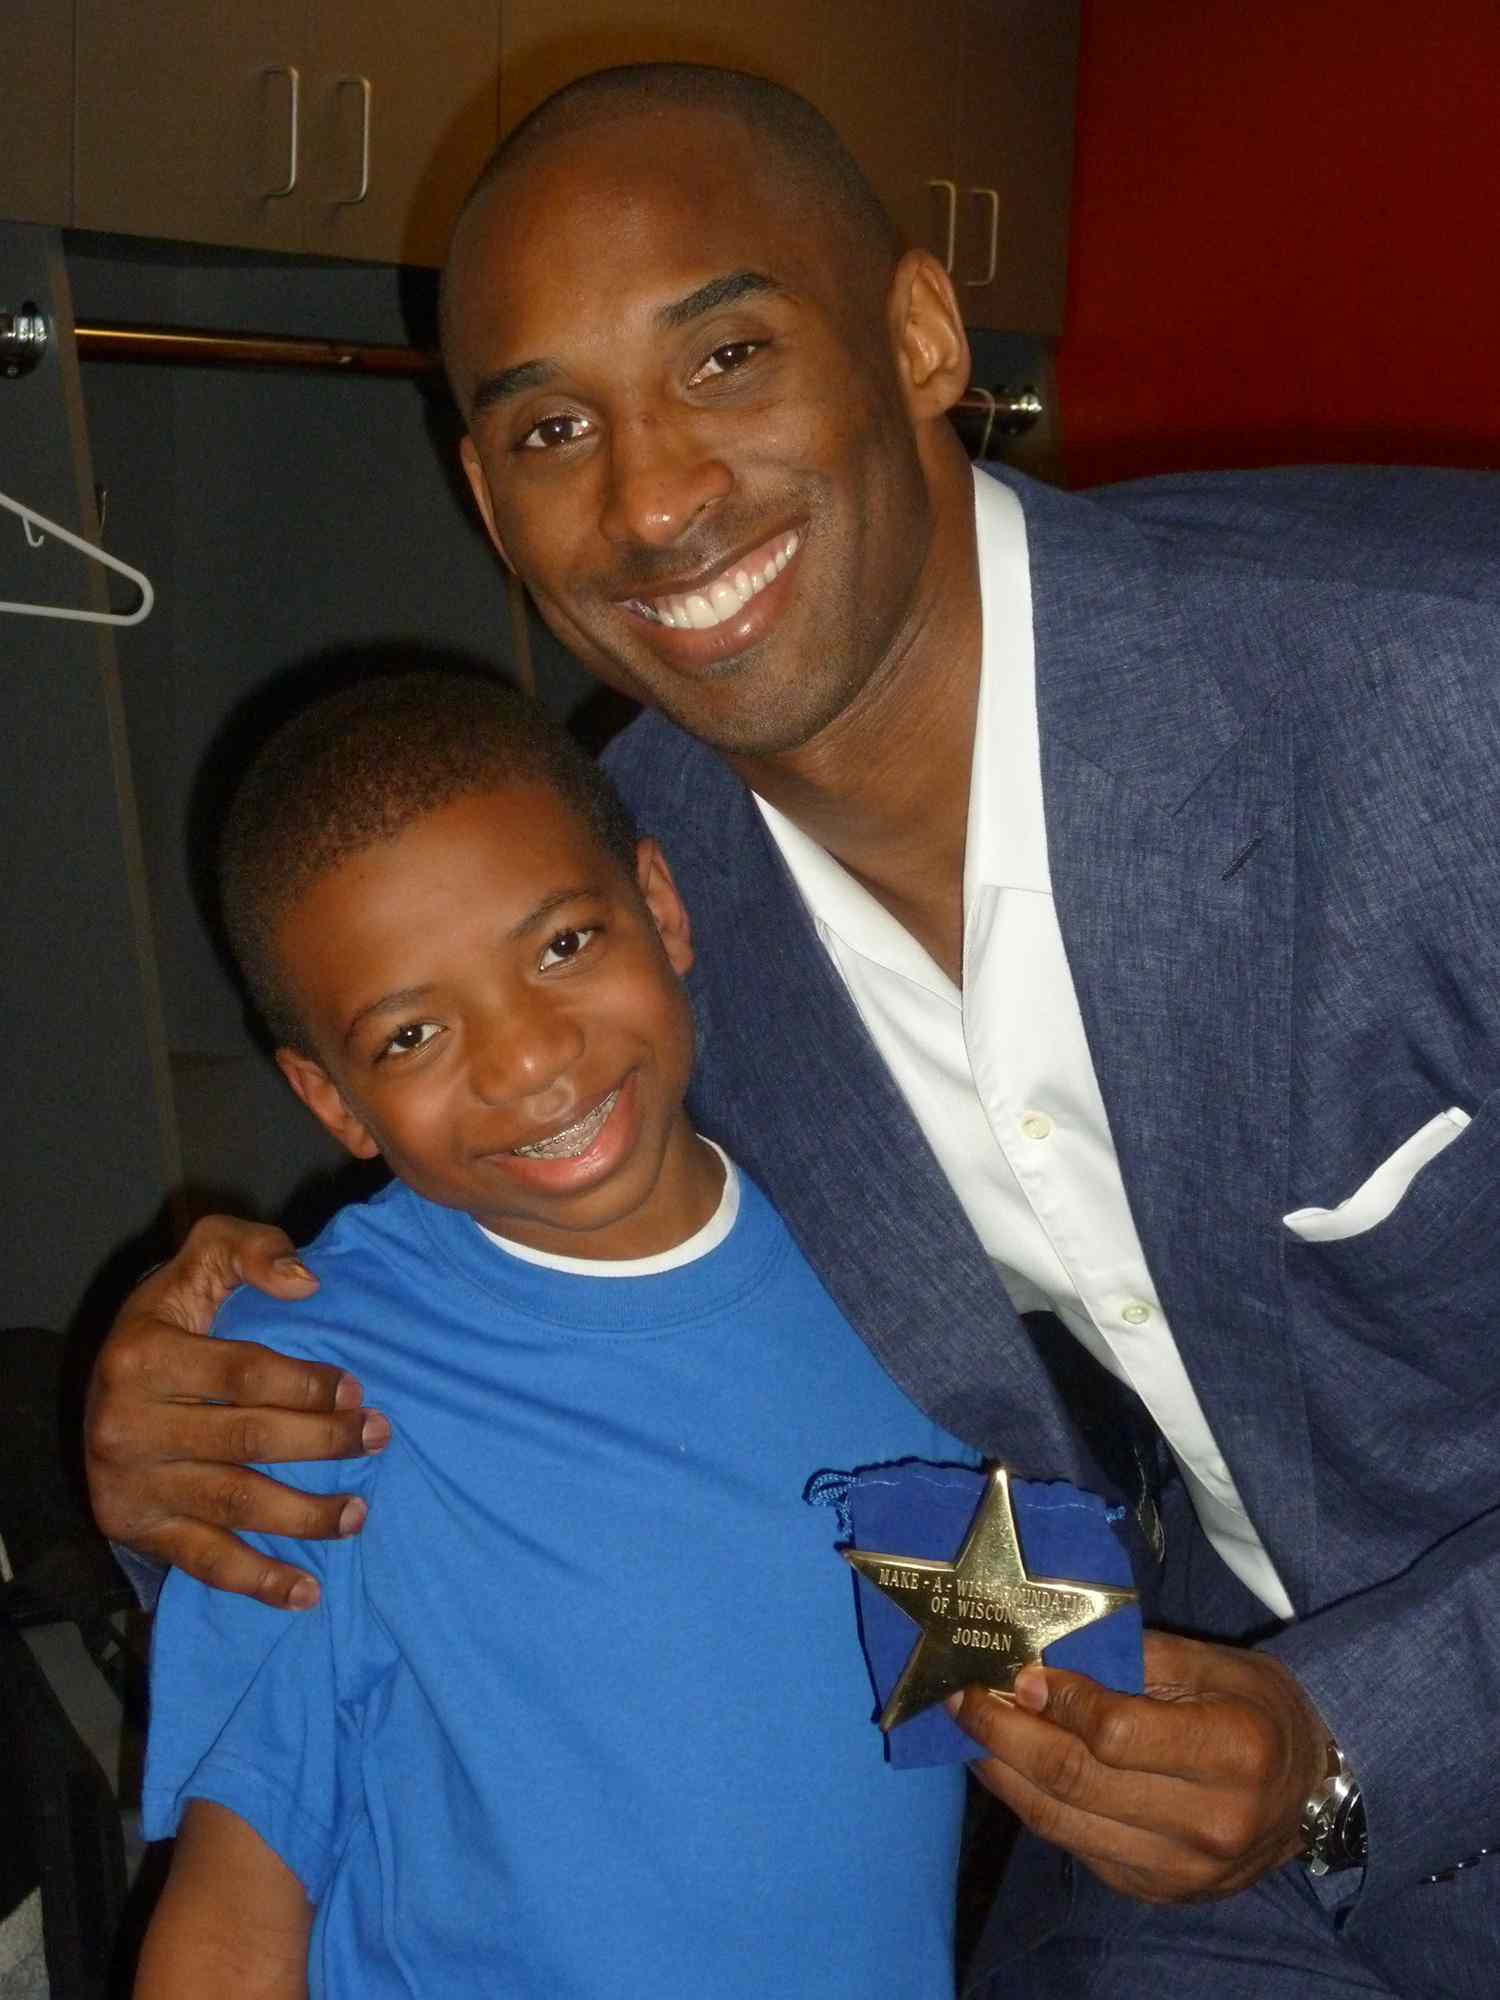 Kobe Bryant Granted Over 200 Make-A-Wish Requests During His NBA Career